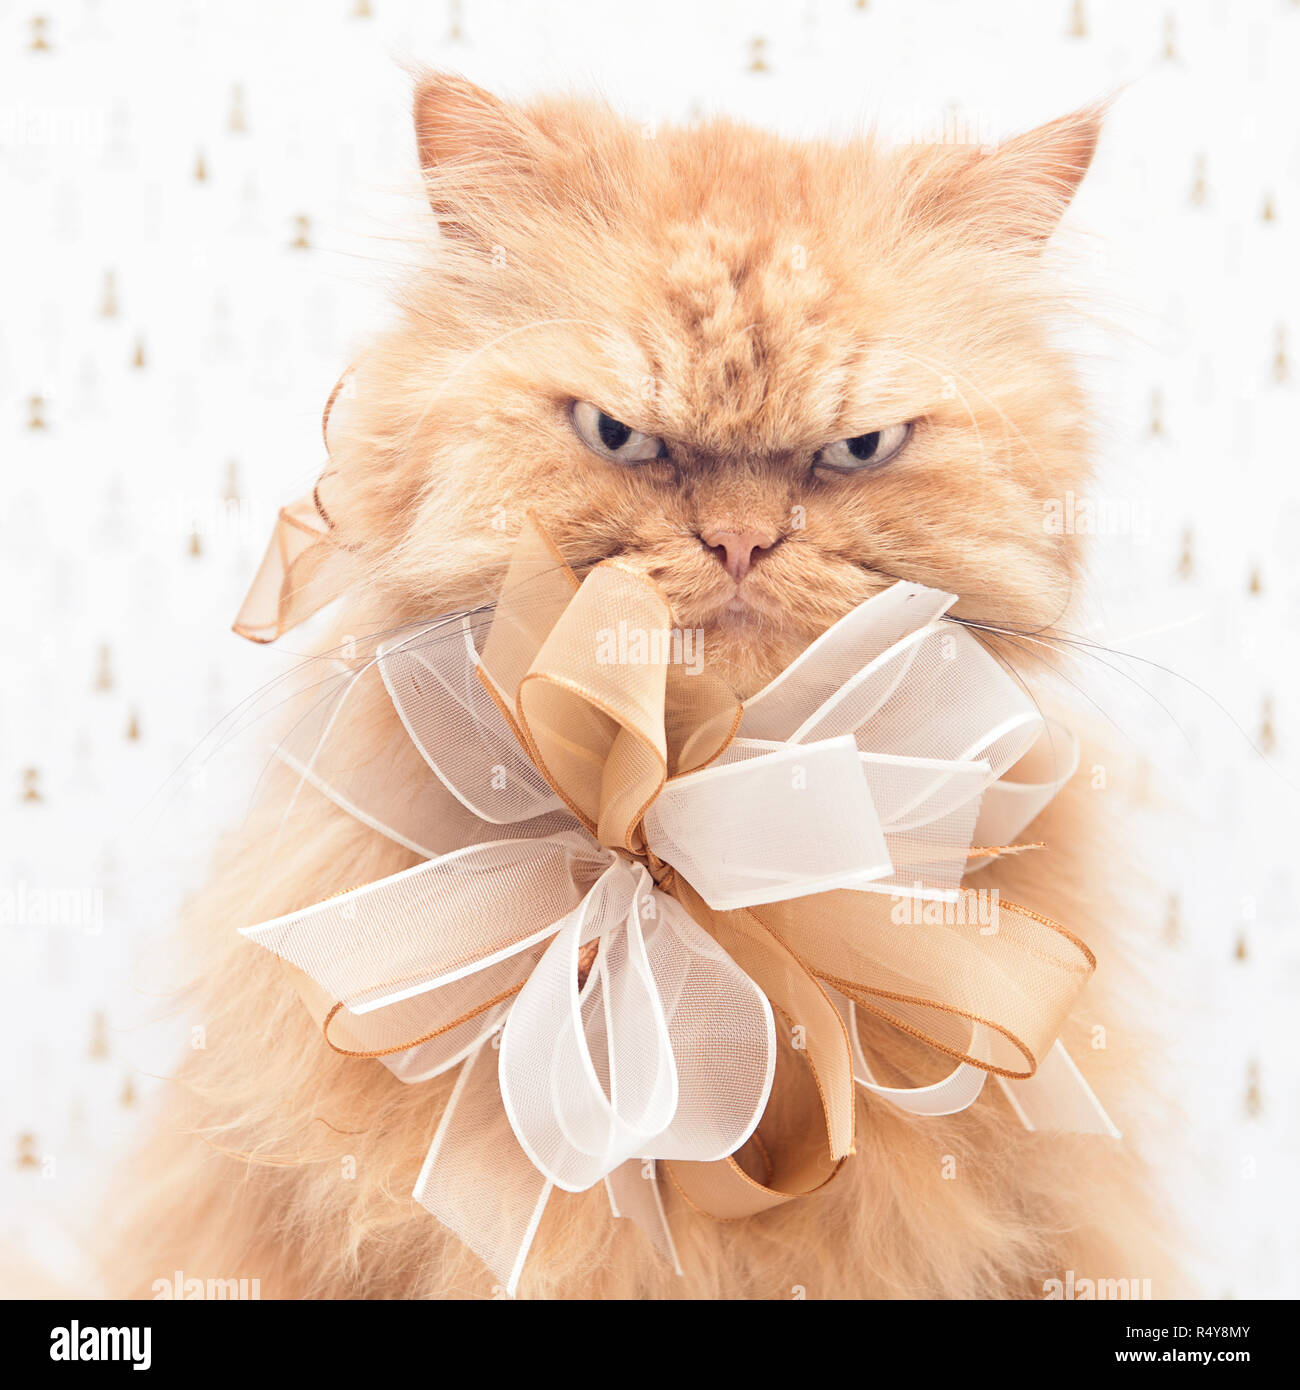 Close up studio portrait of ginger Persian cat with ribbon bowfinger cat Stock Photo